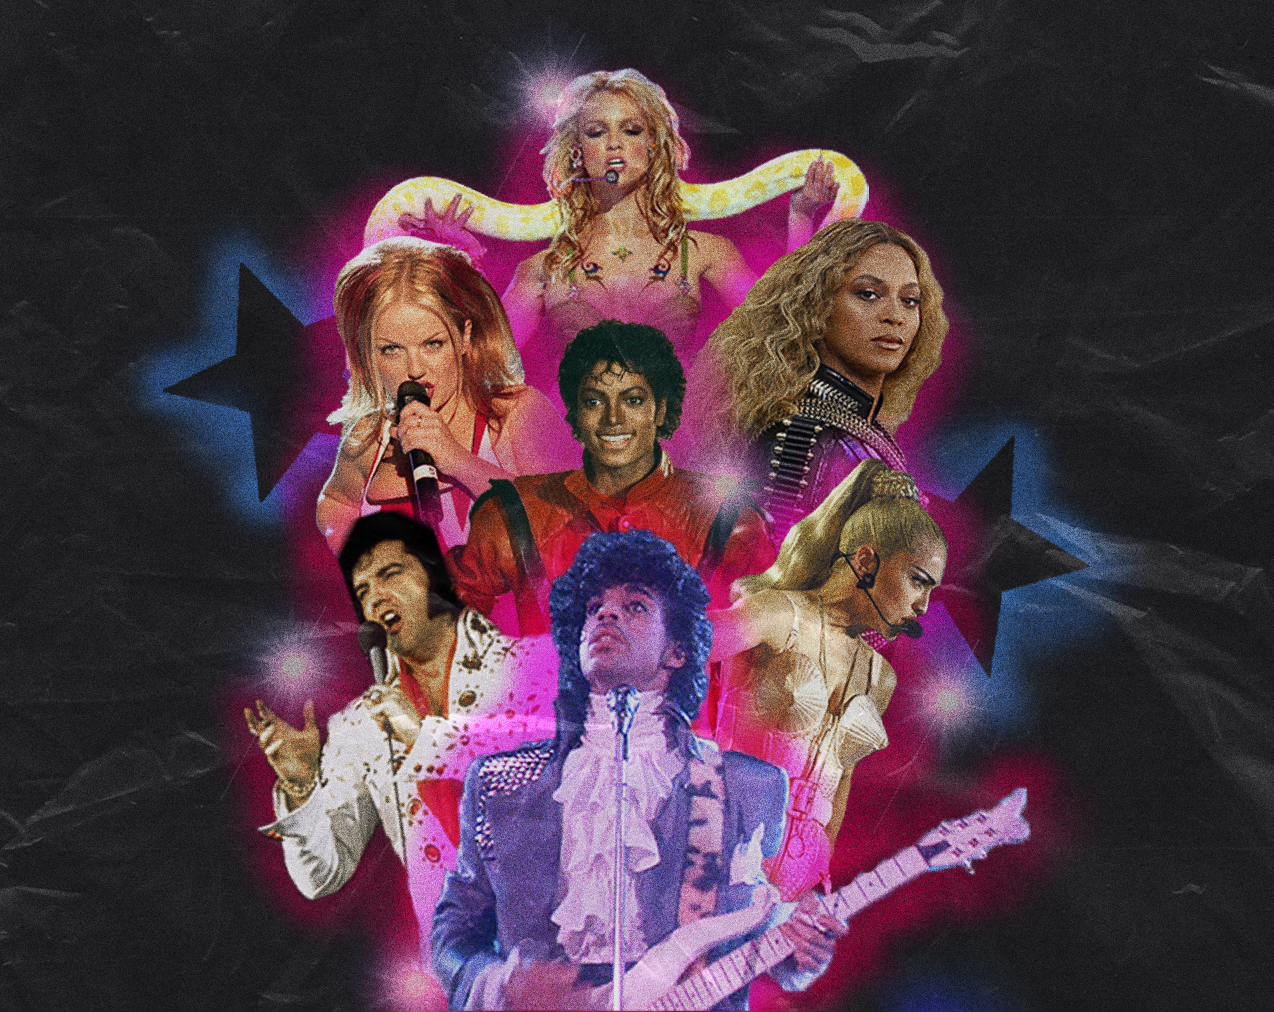 Collage of seven celebrity performance photographs. The background is black with two stars on each side.